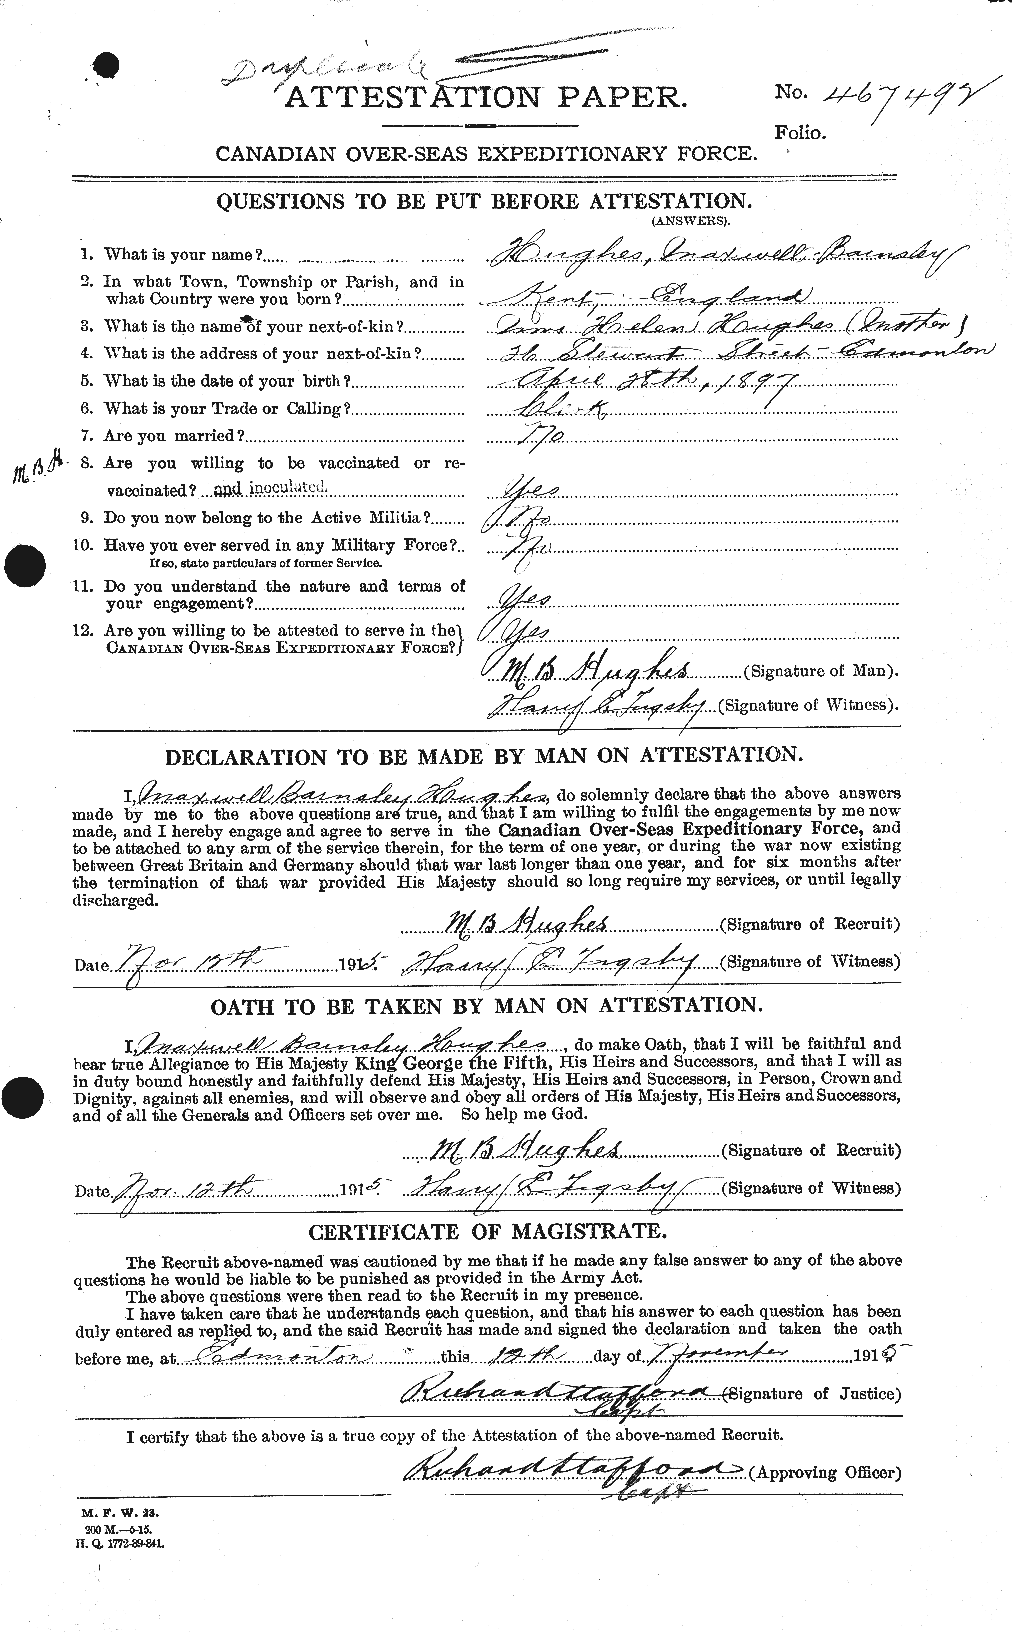 Personnel Records of the First World War - CEF 404118a